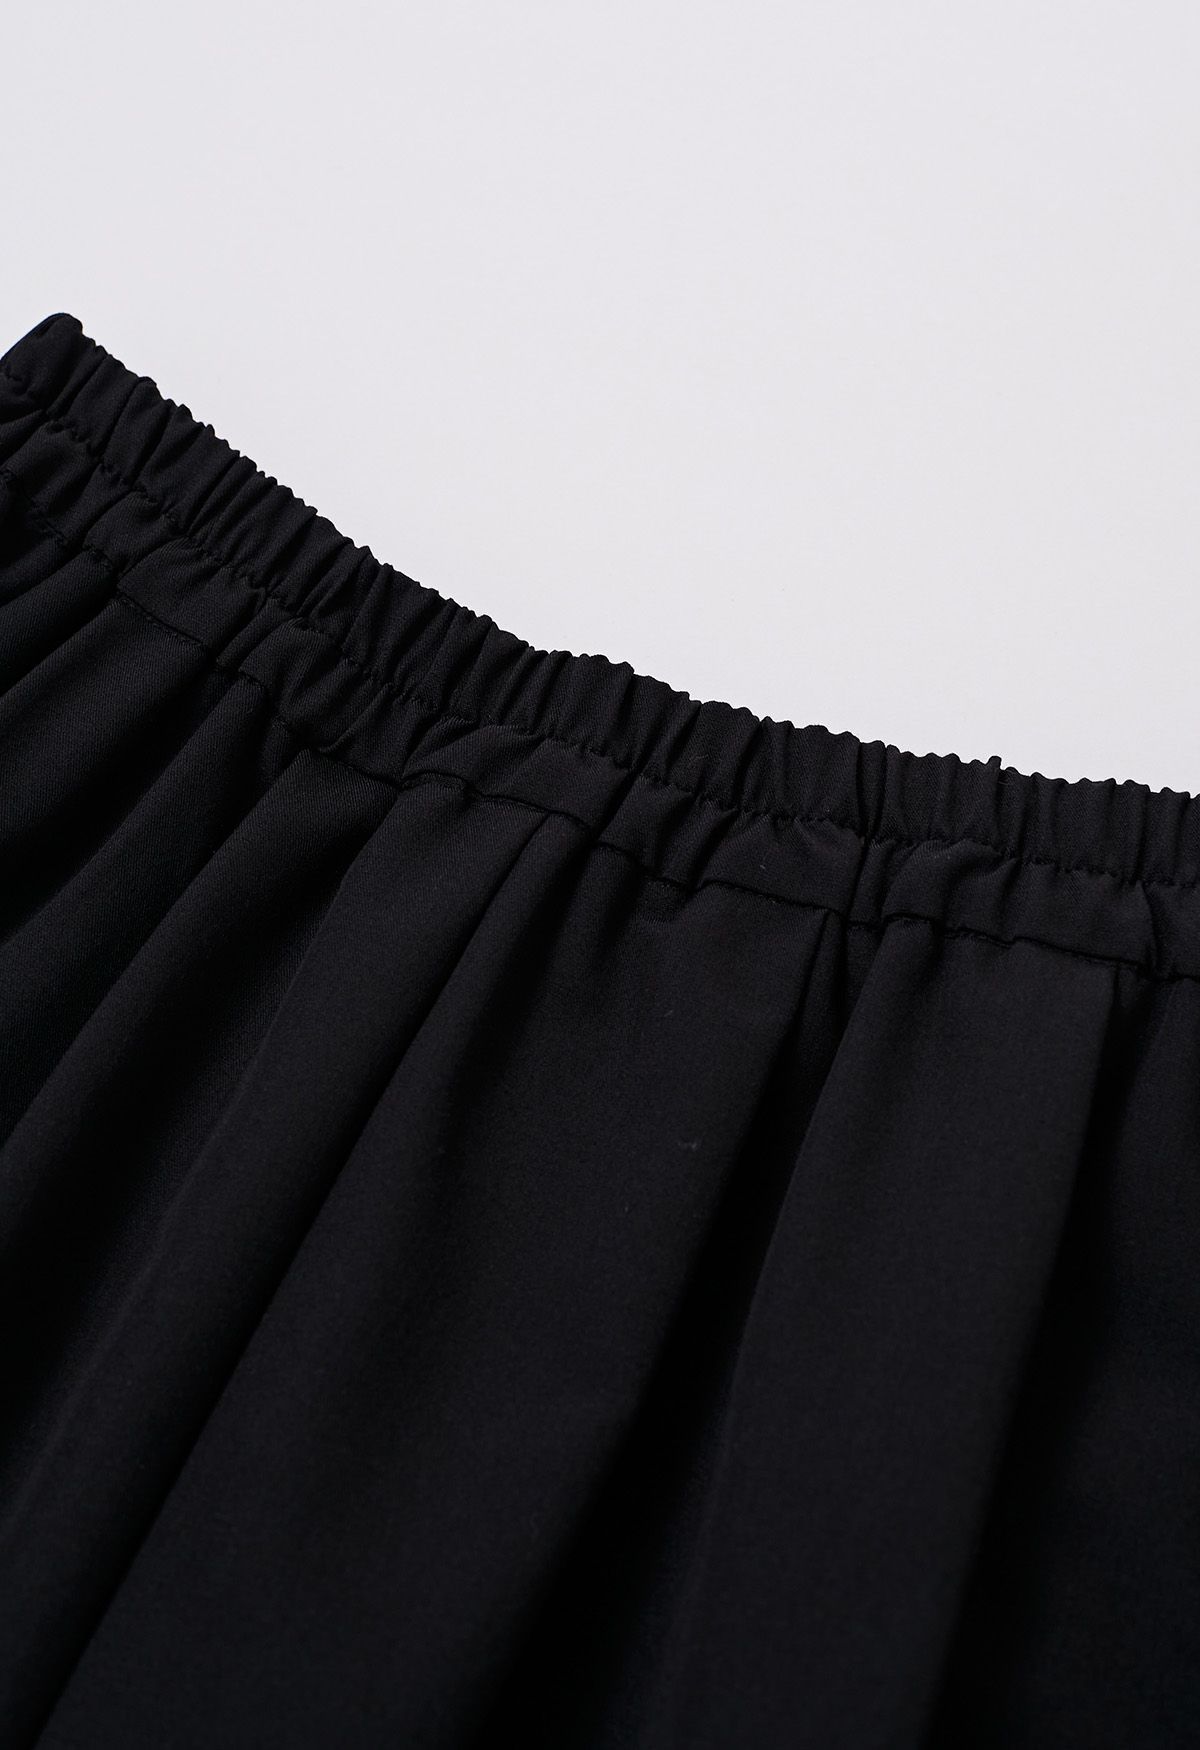 Button Decorated Pleated A-Line Skirt in Black - Retro, Indie and ...